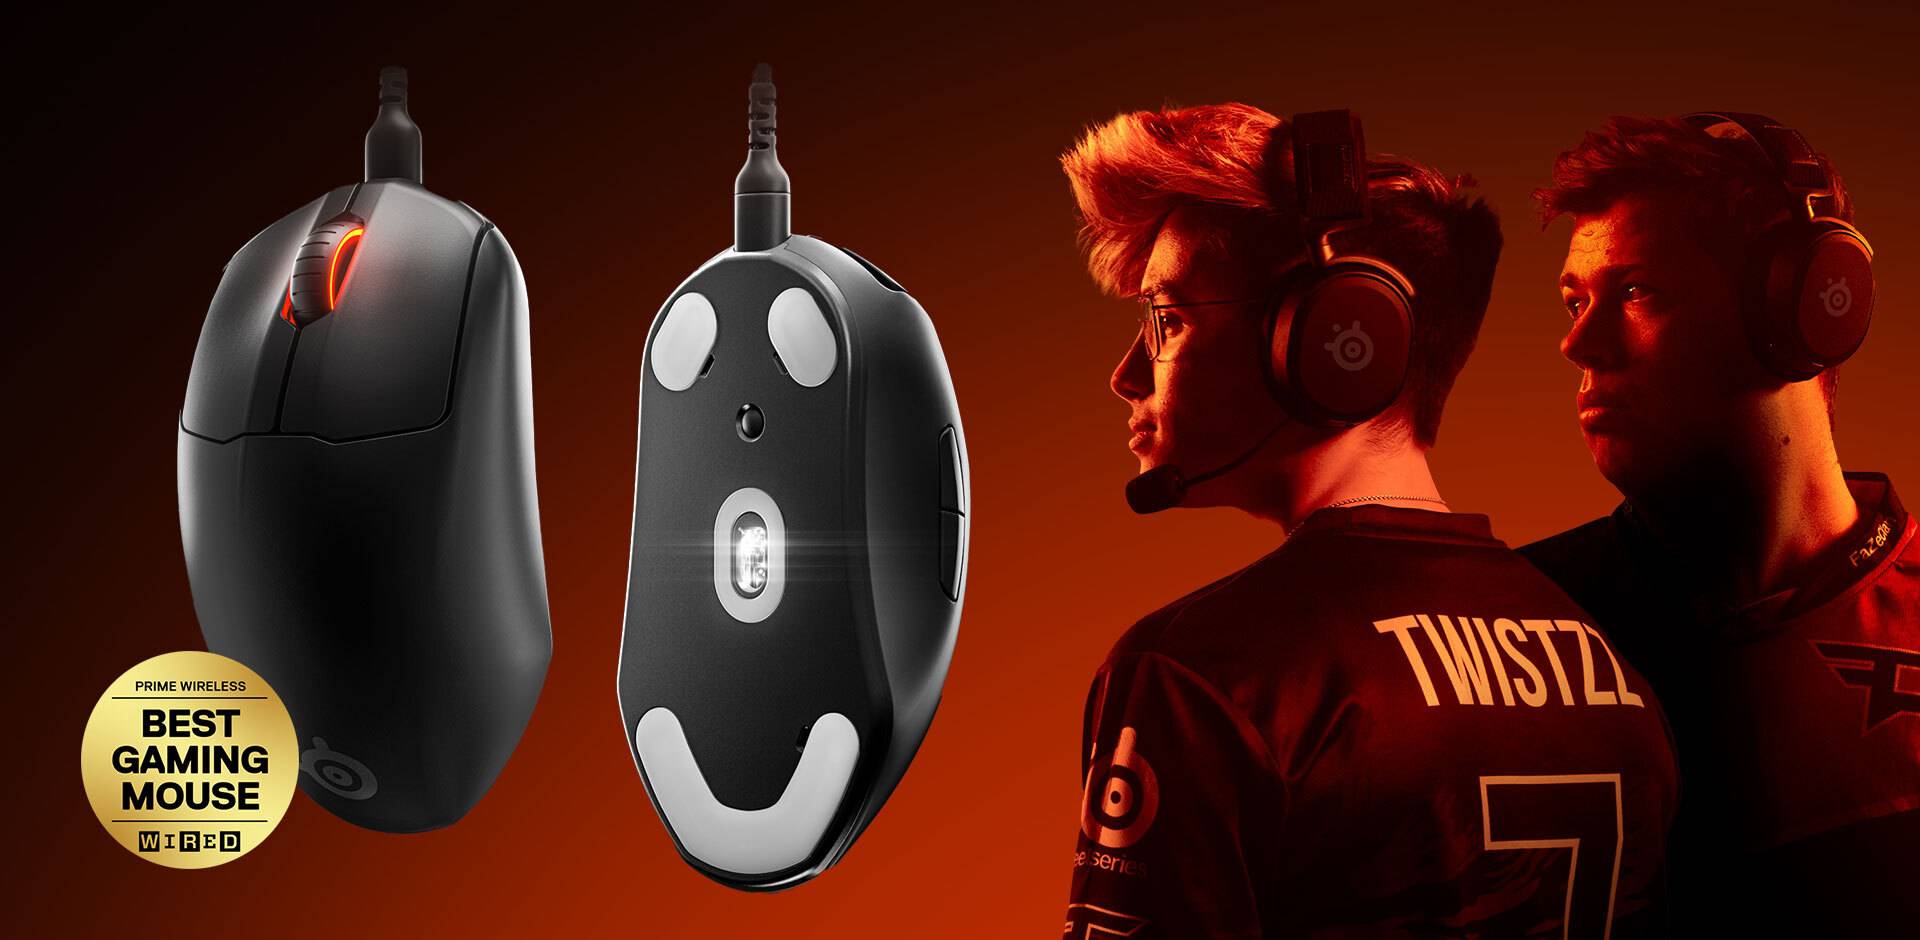 3D Aim Trainer Becomes Part of SteelSeries